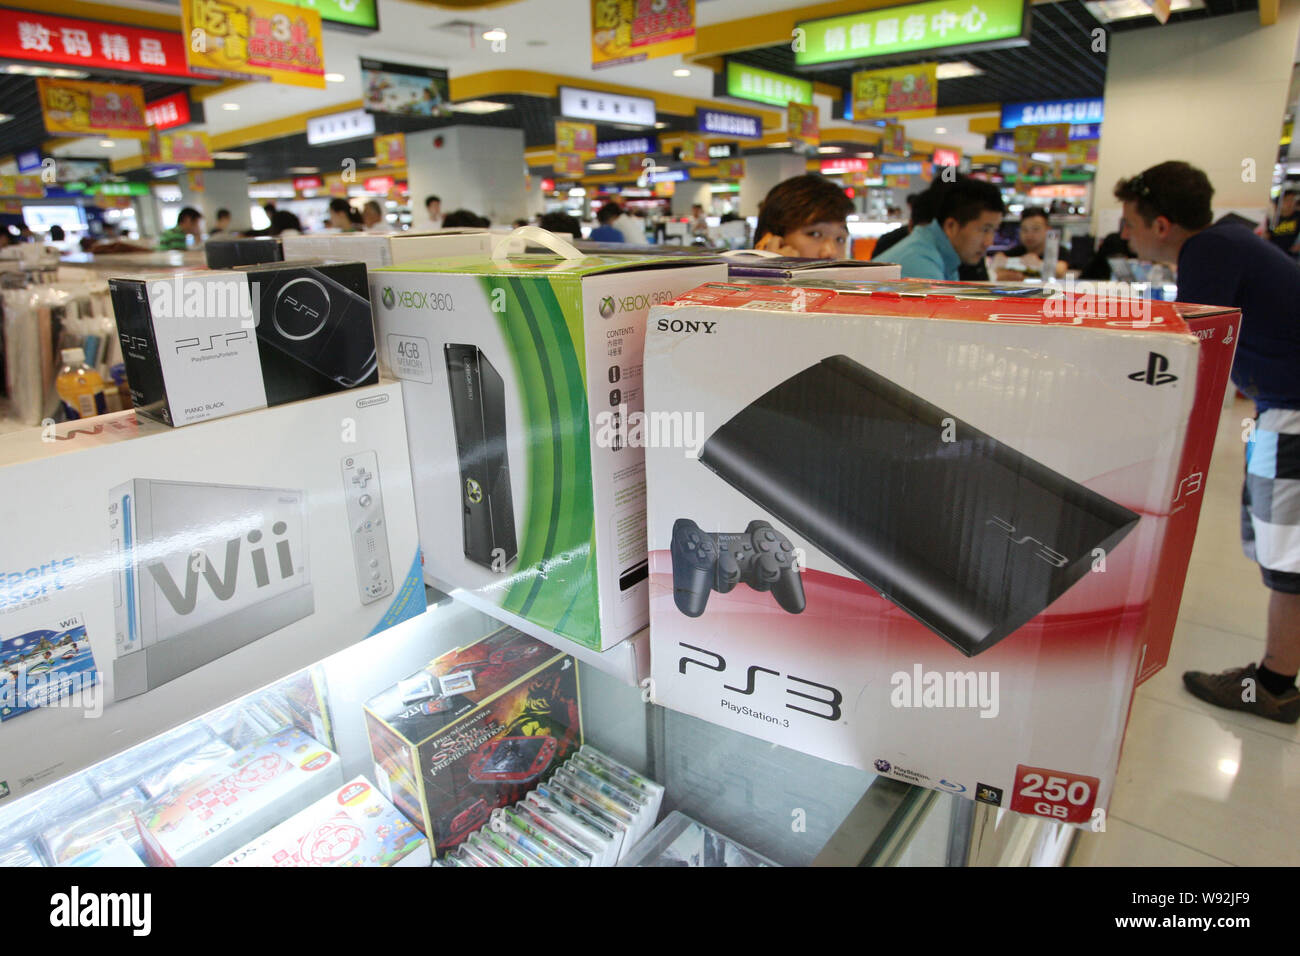 Sony PS3, PSP, Microsoft XBOX 360 and Nintendo Wii game consoles are for sale at a stall in a digital products mall in Shanghai, China, 10 July 2013. Stock Photo